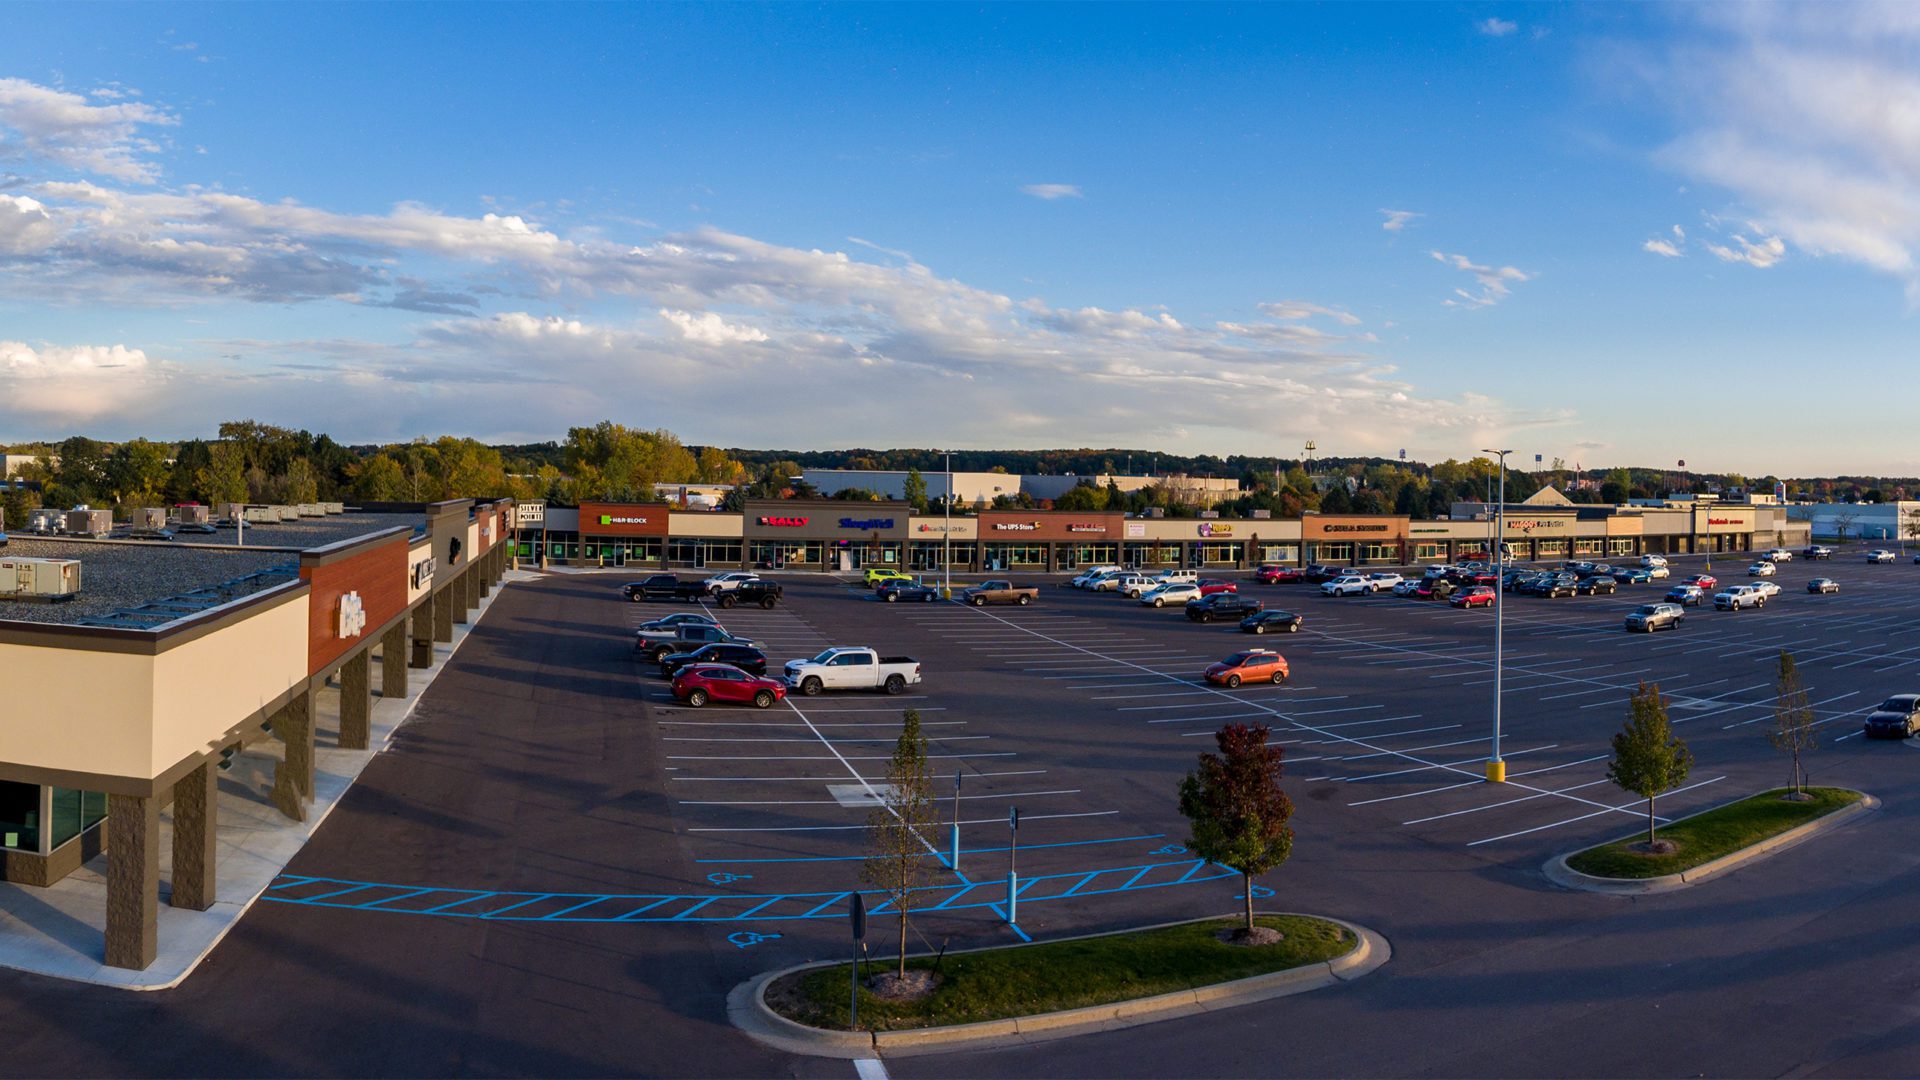 Silver Pointe Shopping Center Exterior. Brick plaza with a variety of different stores